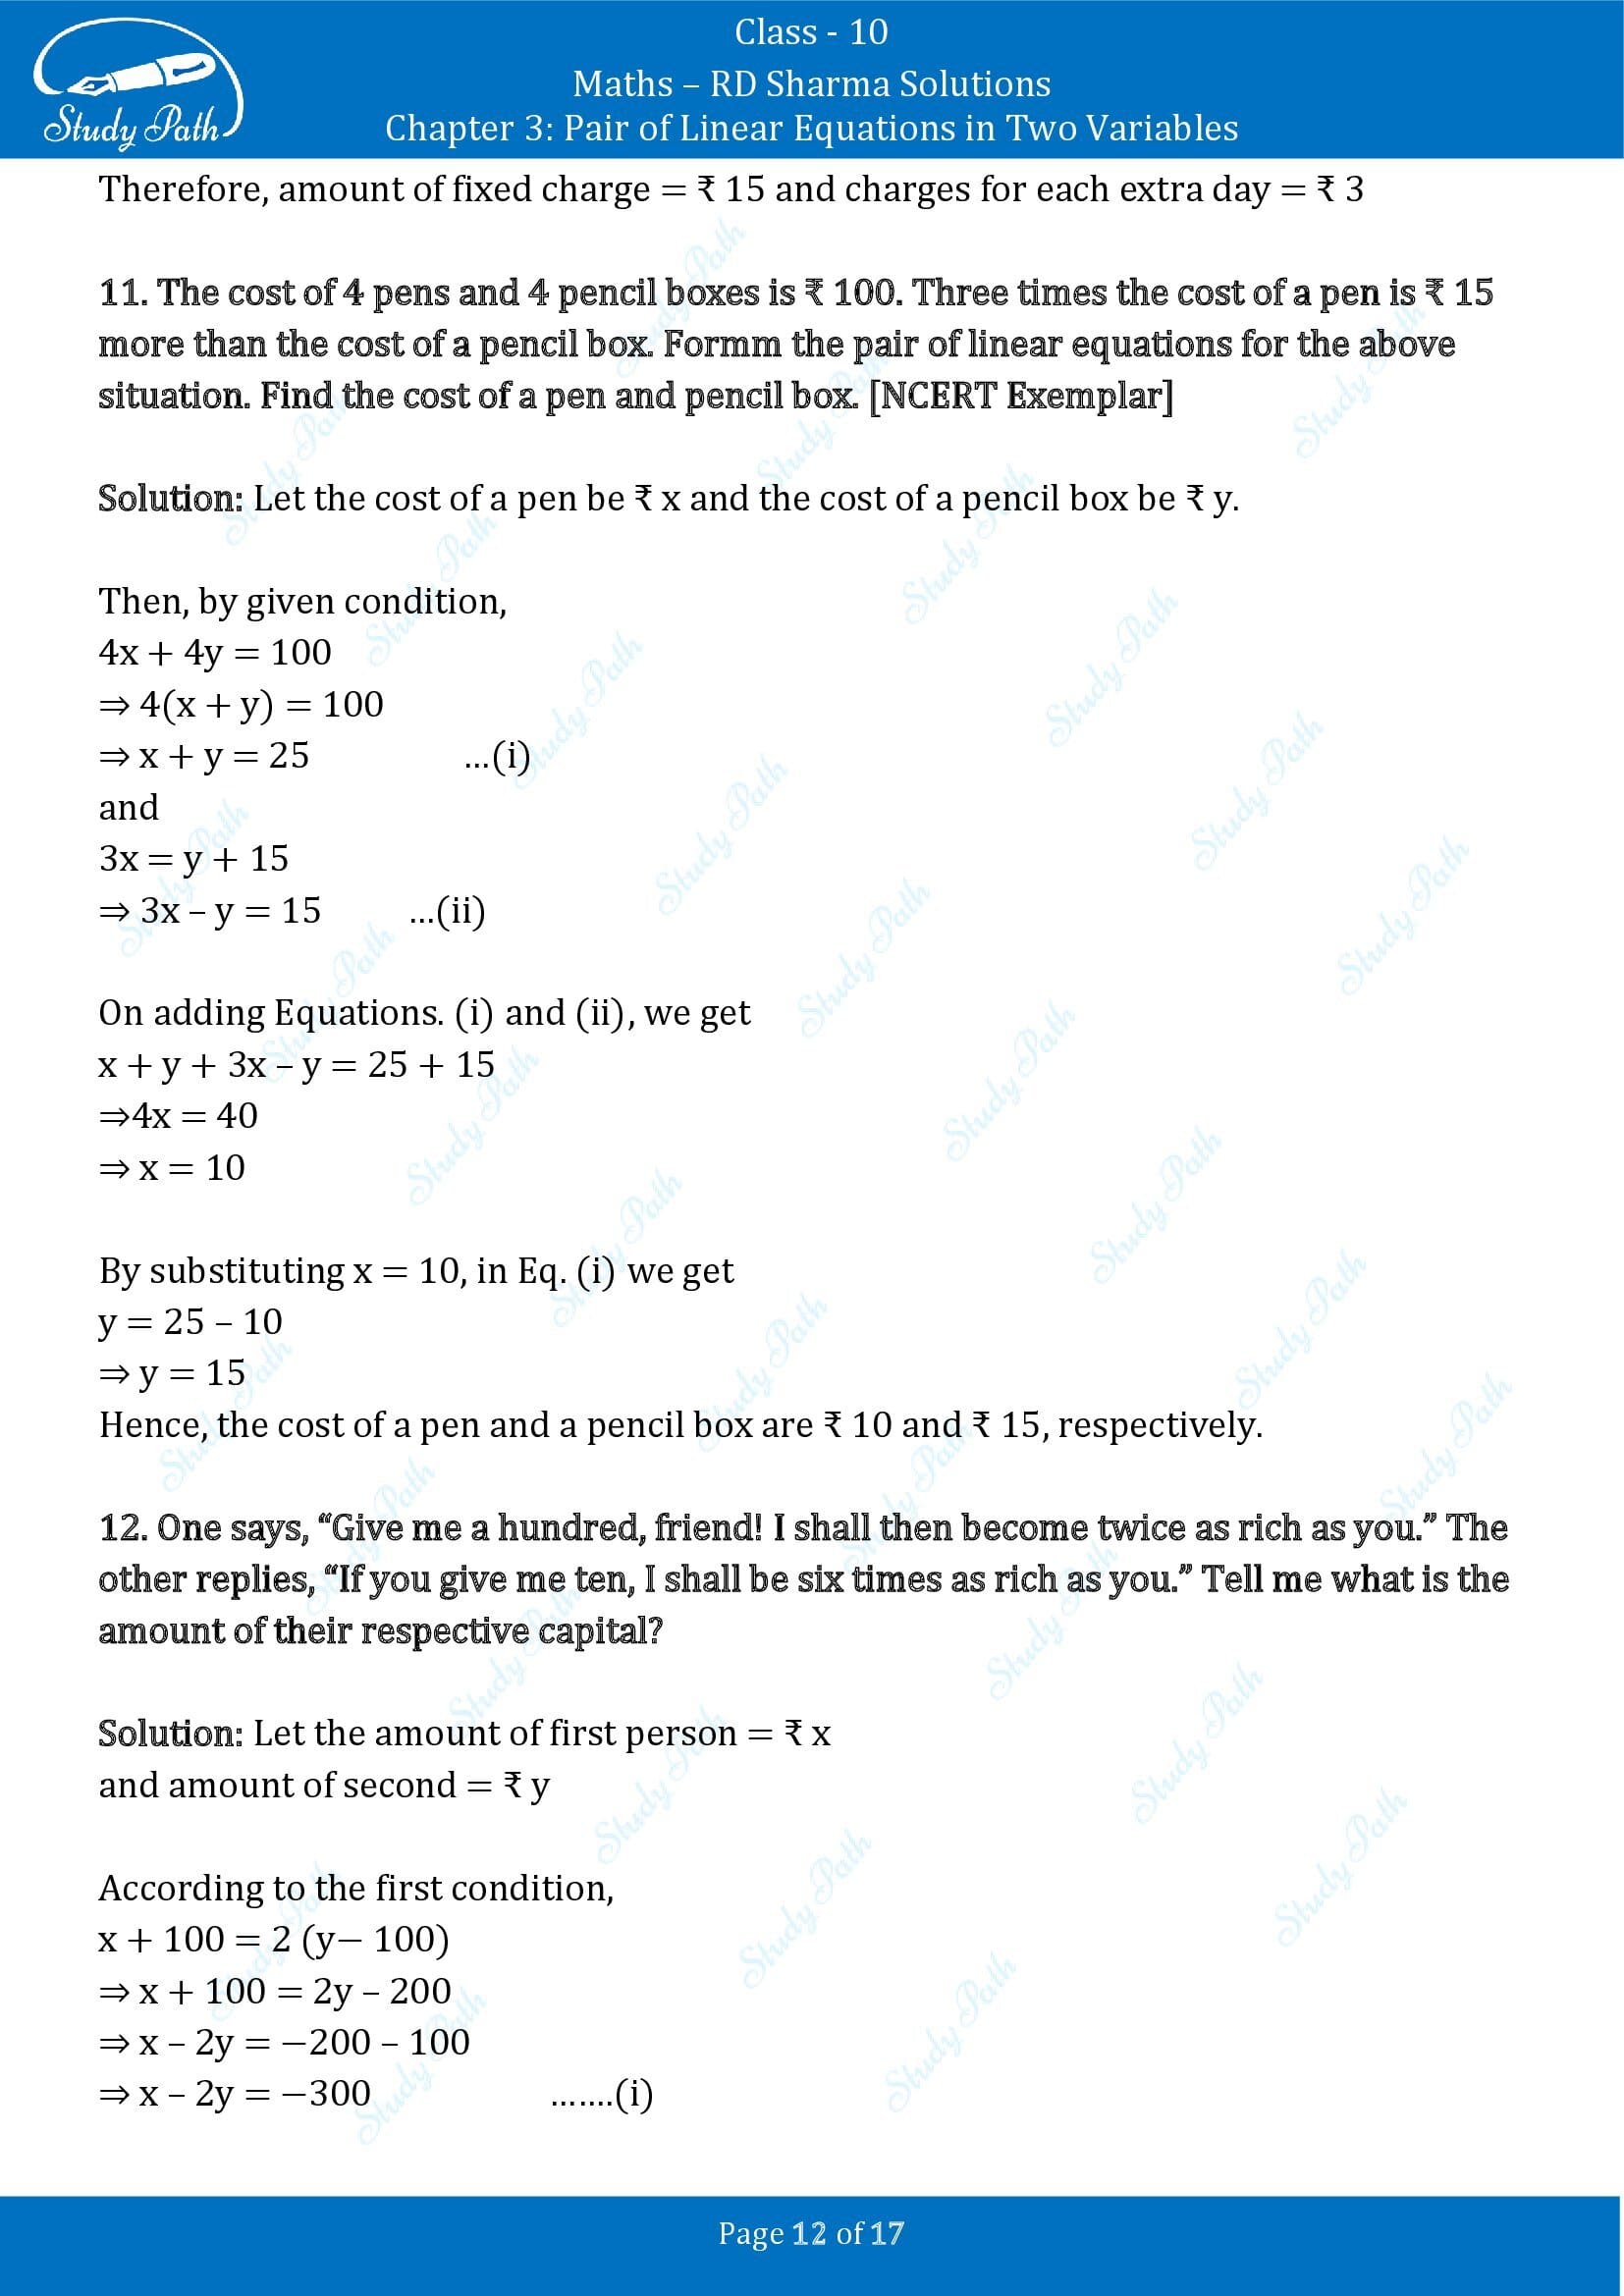 RD Sharma Solutions Class 10 Chapter 3 Pair of Linear Equations in Two Variables Exercise 3.6 00012